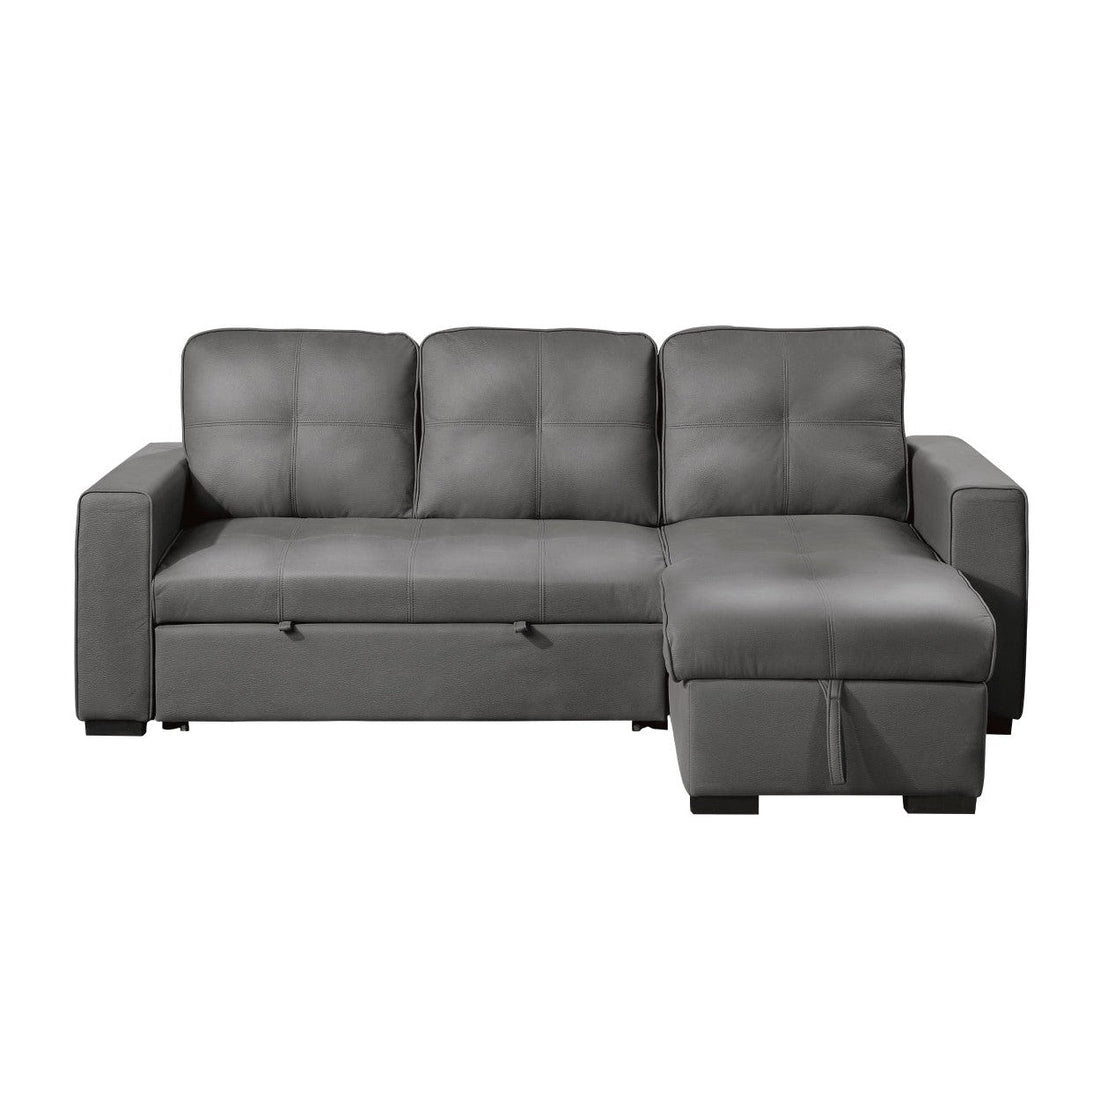 (2)2-Piece Reversible Sectional with Pull-out Bed and Hidden Storage 9569NFGY*SC